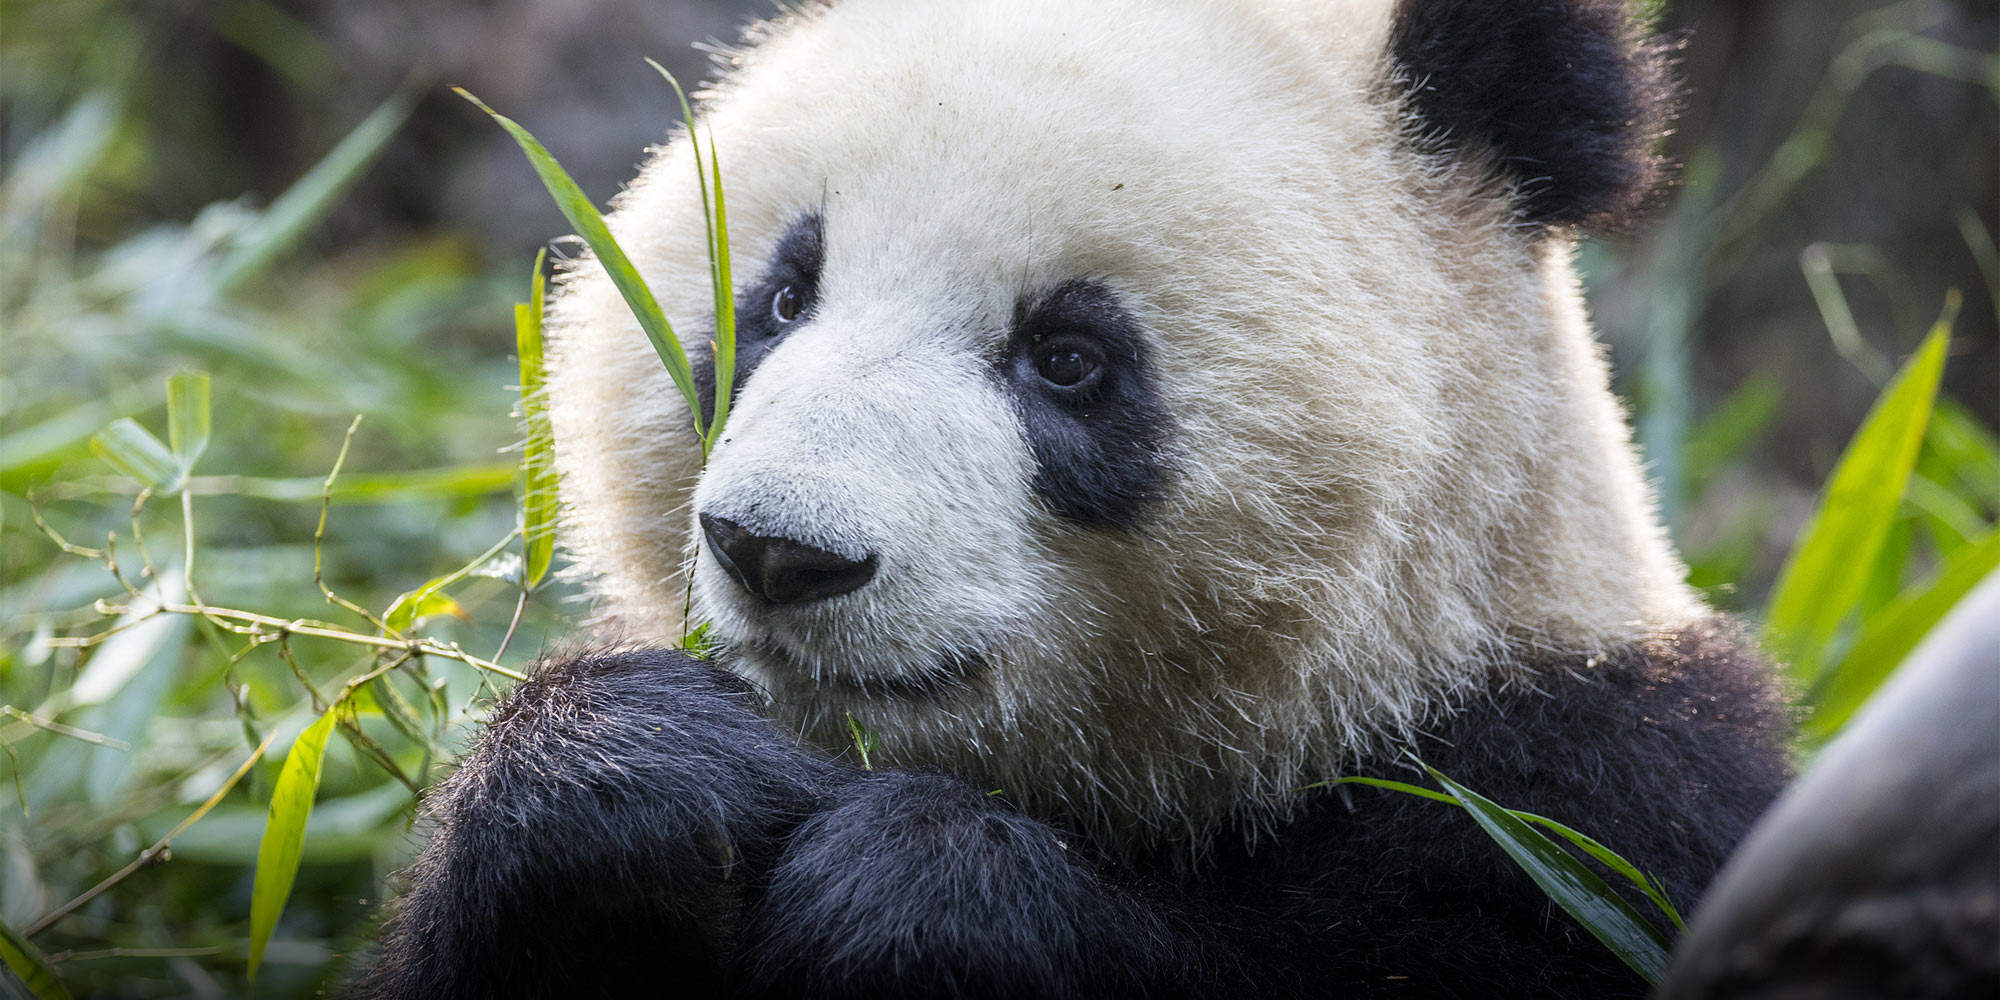 The Real Significance of China's New Giant Panda National Park